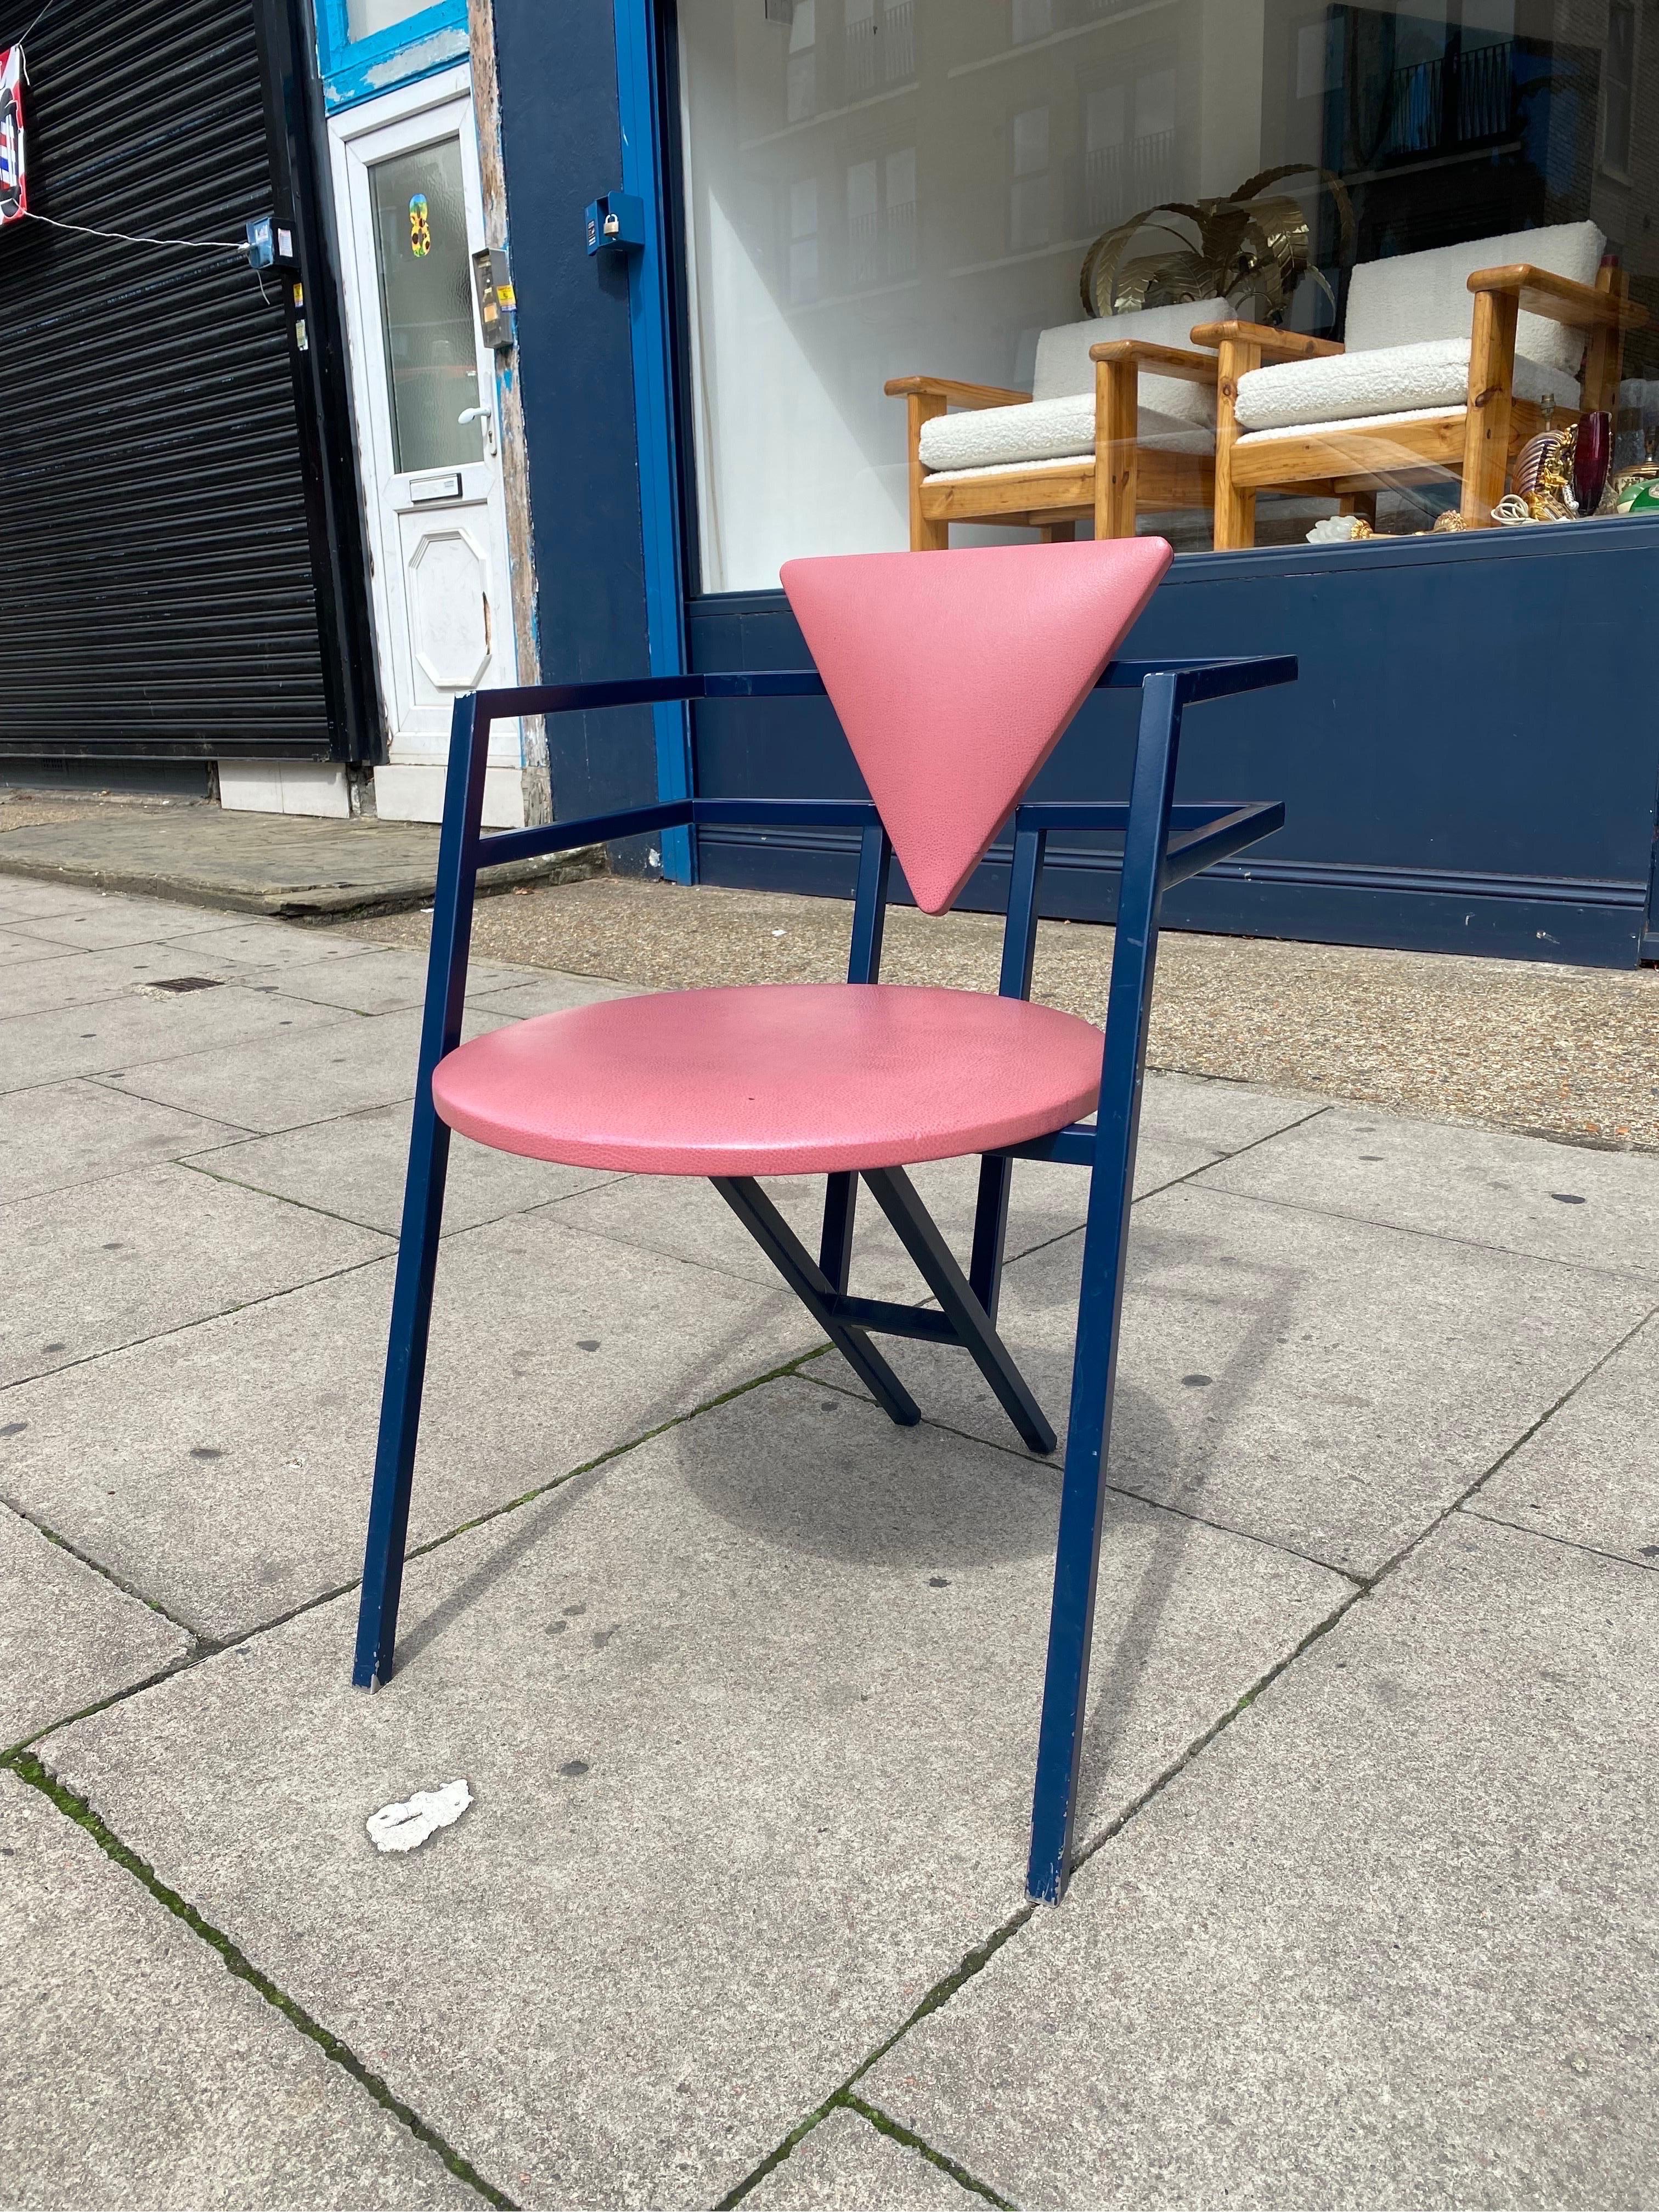 1 Druillet Postmodern 1980s Blue Pink Dining Chair Jean Allemand Vintage Desk In Fair Condition For Sale In London, GB